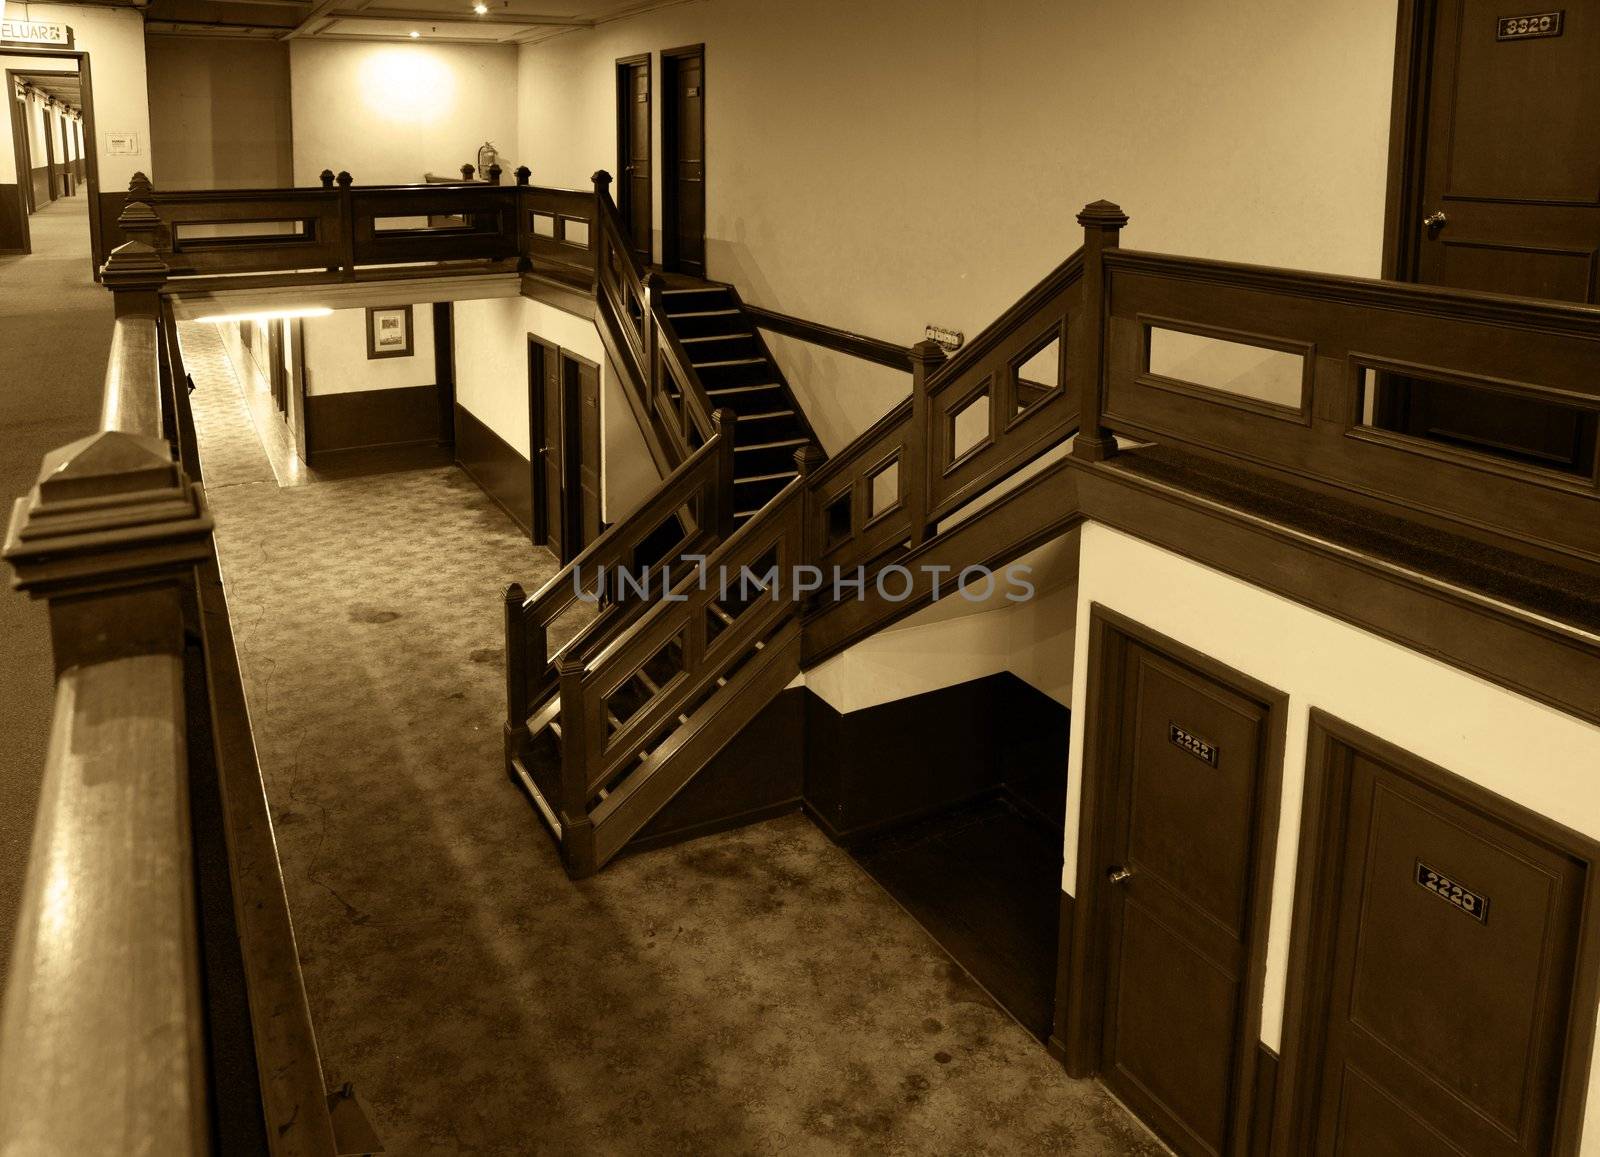 inside the old hotel by clearviewstock